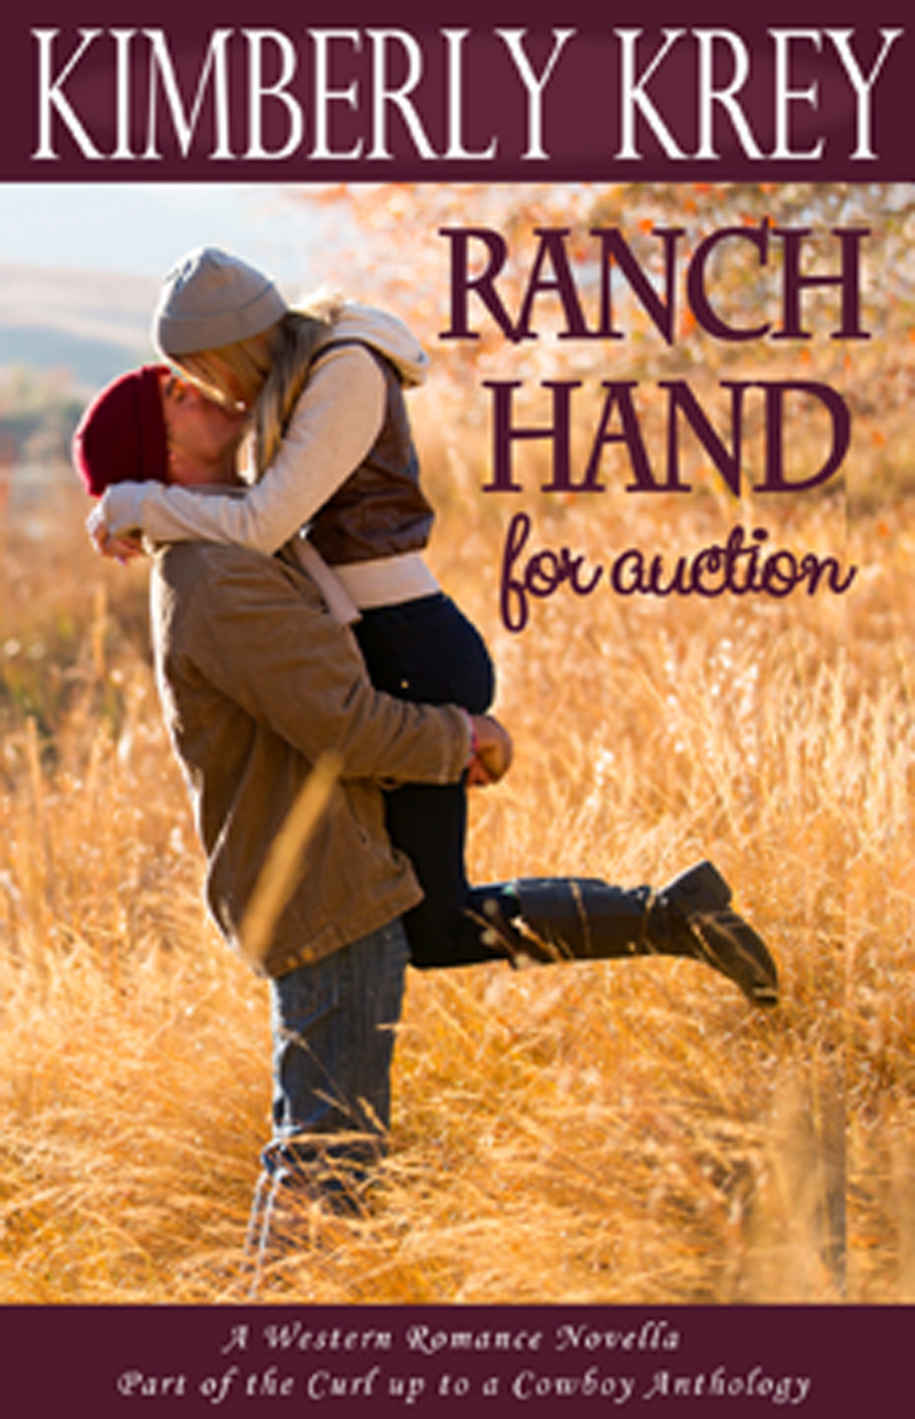 Ranch Hand For Auction: A Western Romance Novella by Kimberly Krey